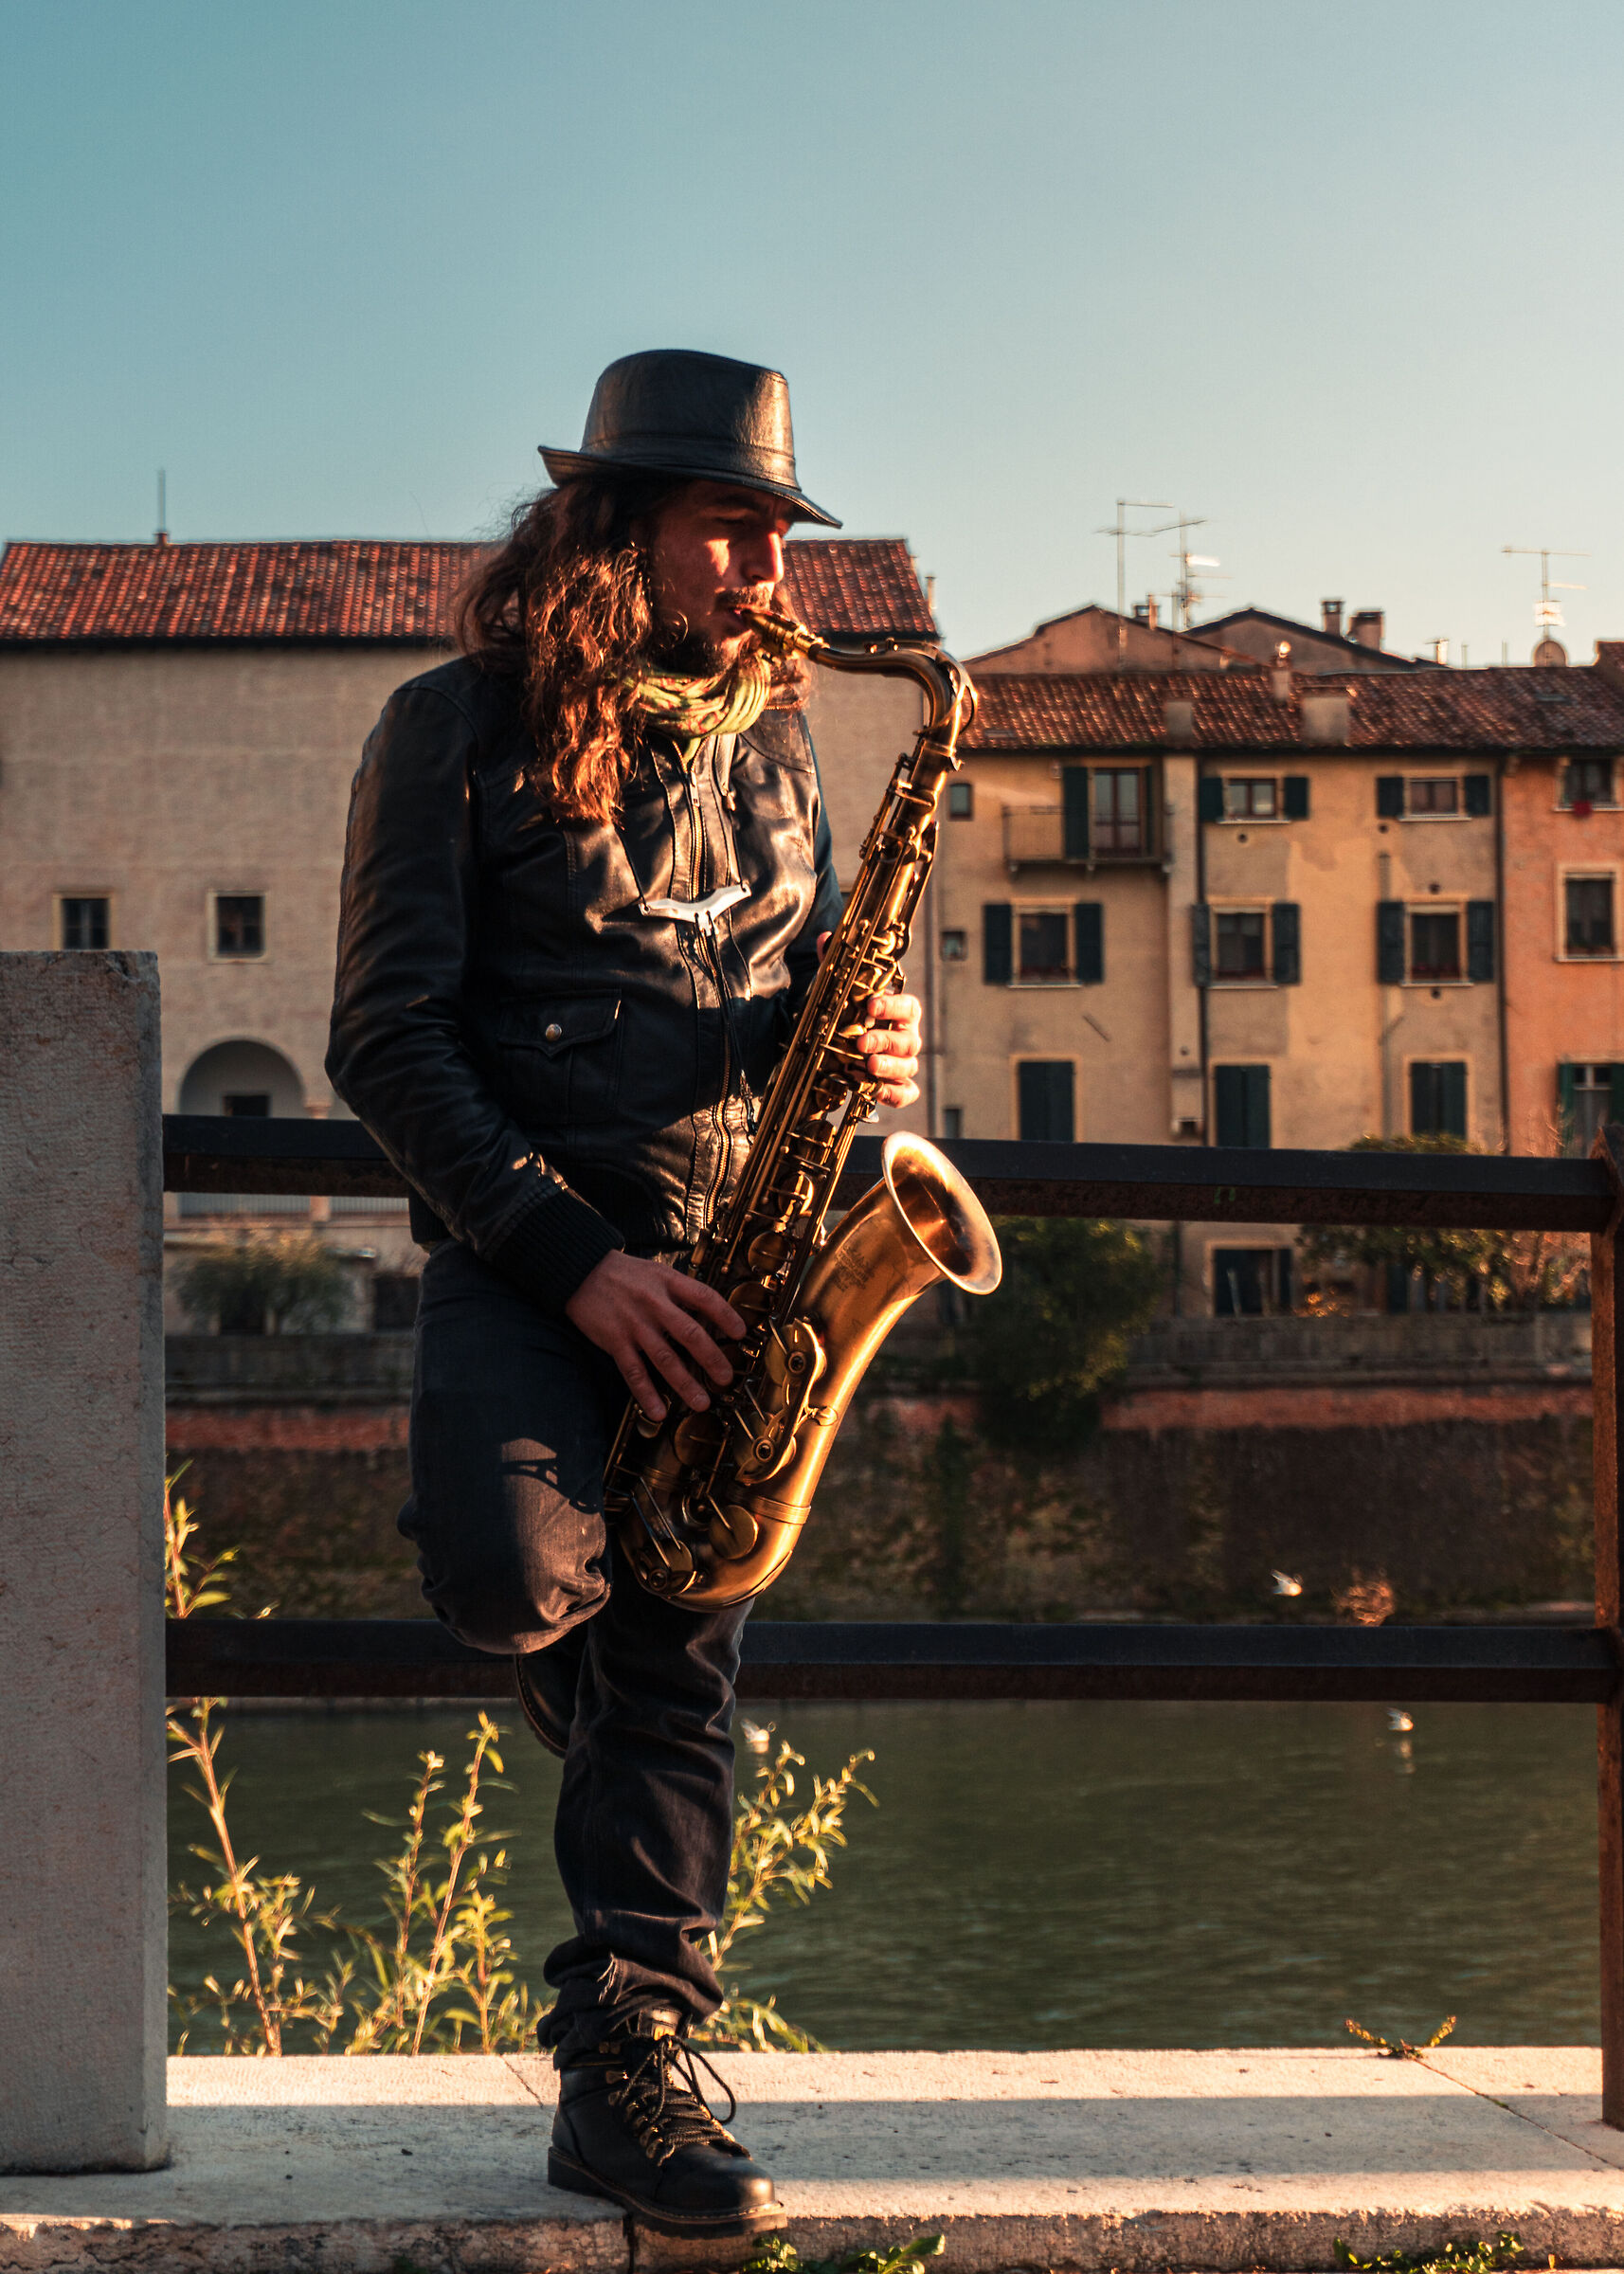 A Saxophonist in the street of Verona...